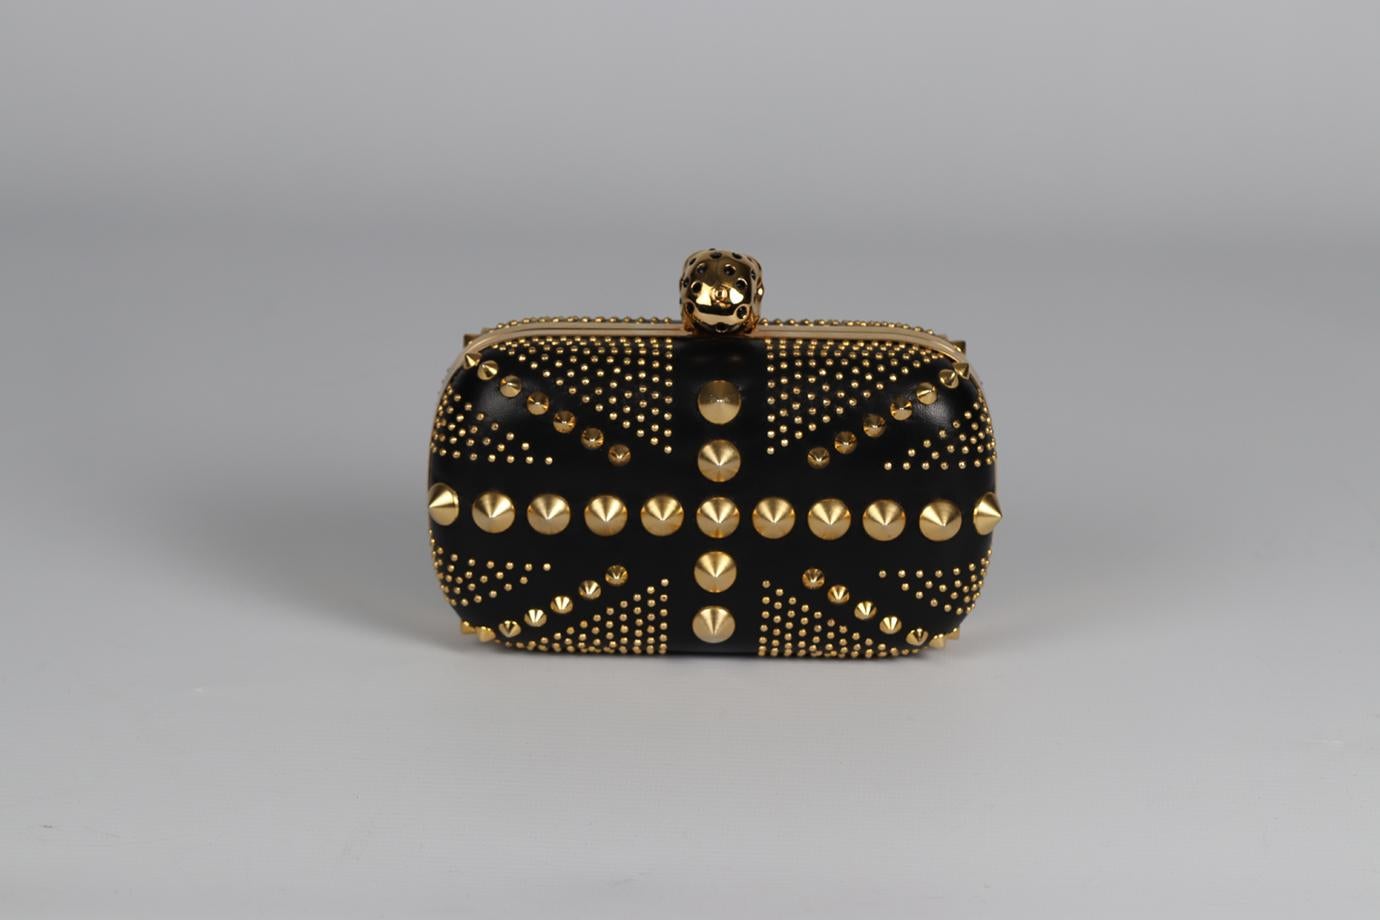 Alexander Mcqueen Leather Clutch In Excellent Condition For Sale In London, GB